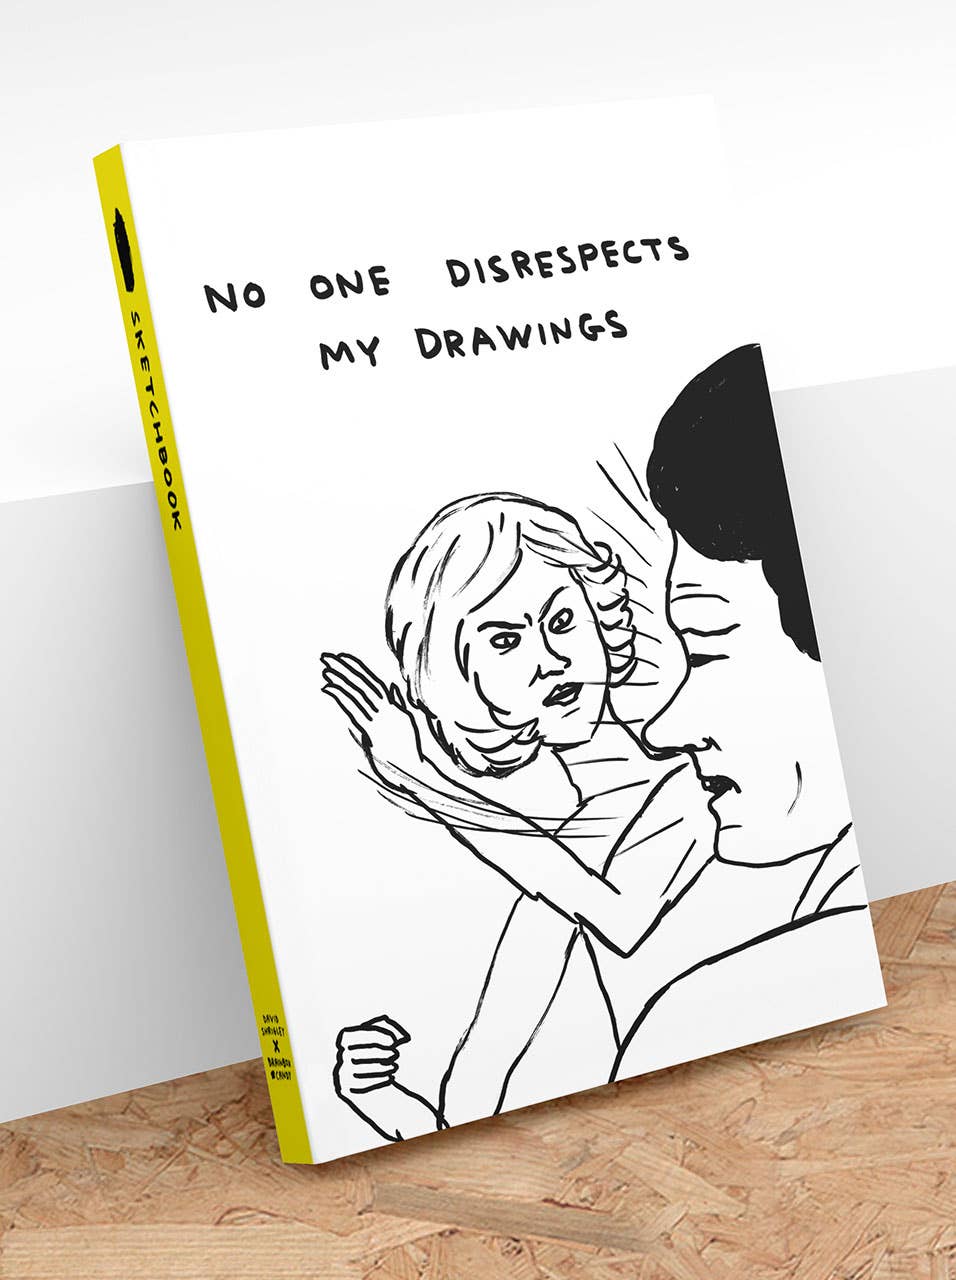 David Shrigley Sketchbook No One Disrespects My Drawings